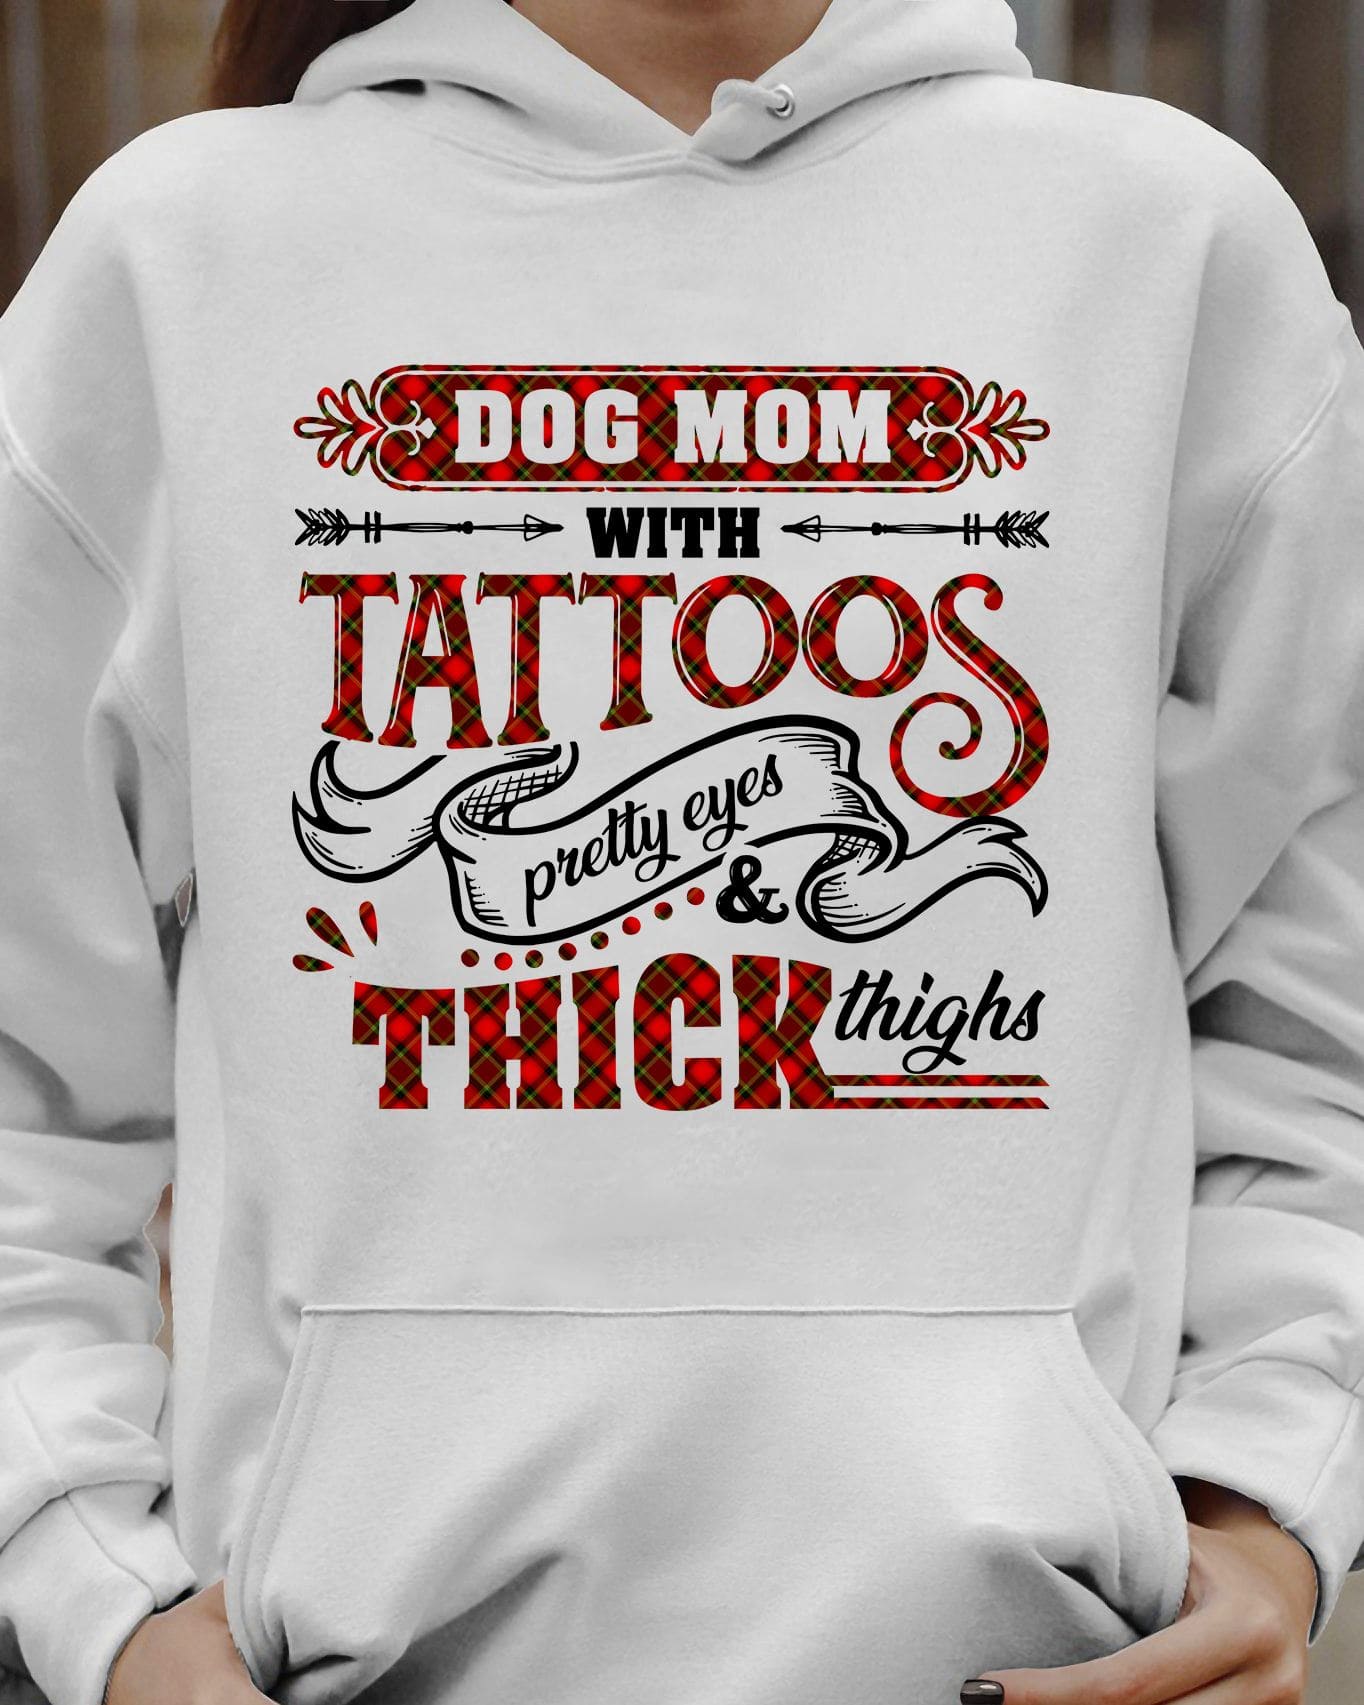 Some Women have tattoos pretty eyes thick thighs and cuss too much its me  Im some Women Greeting Card for Sale by clothesy7  Redbubble